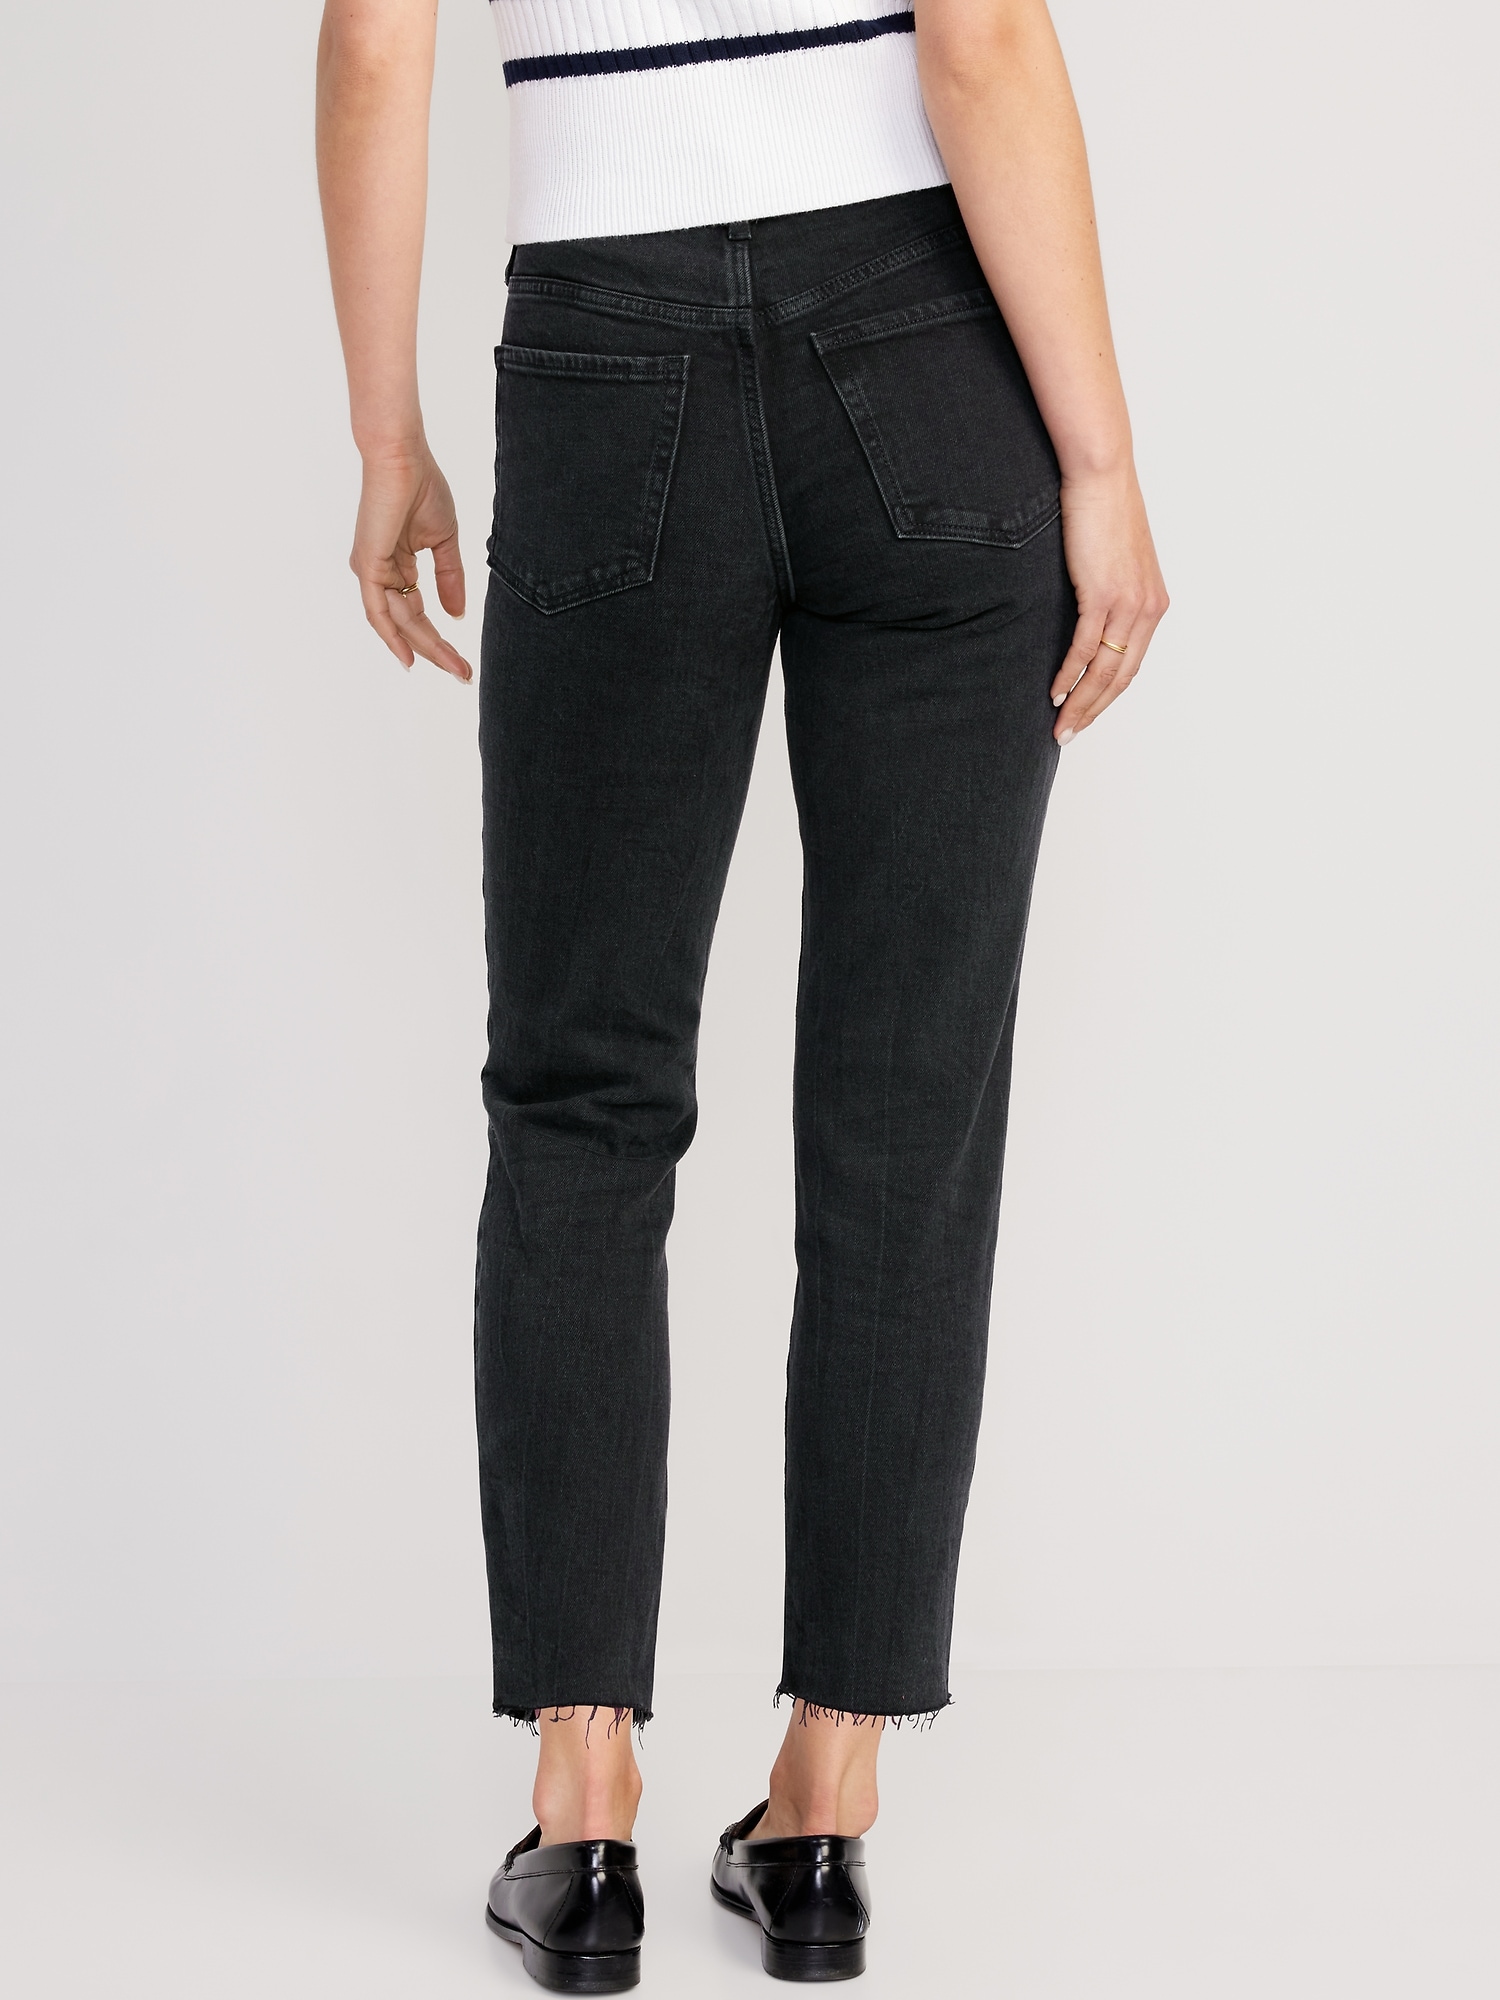 High-Waisted OG Straight Black Cutoff Jeans for Women | Old Navy